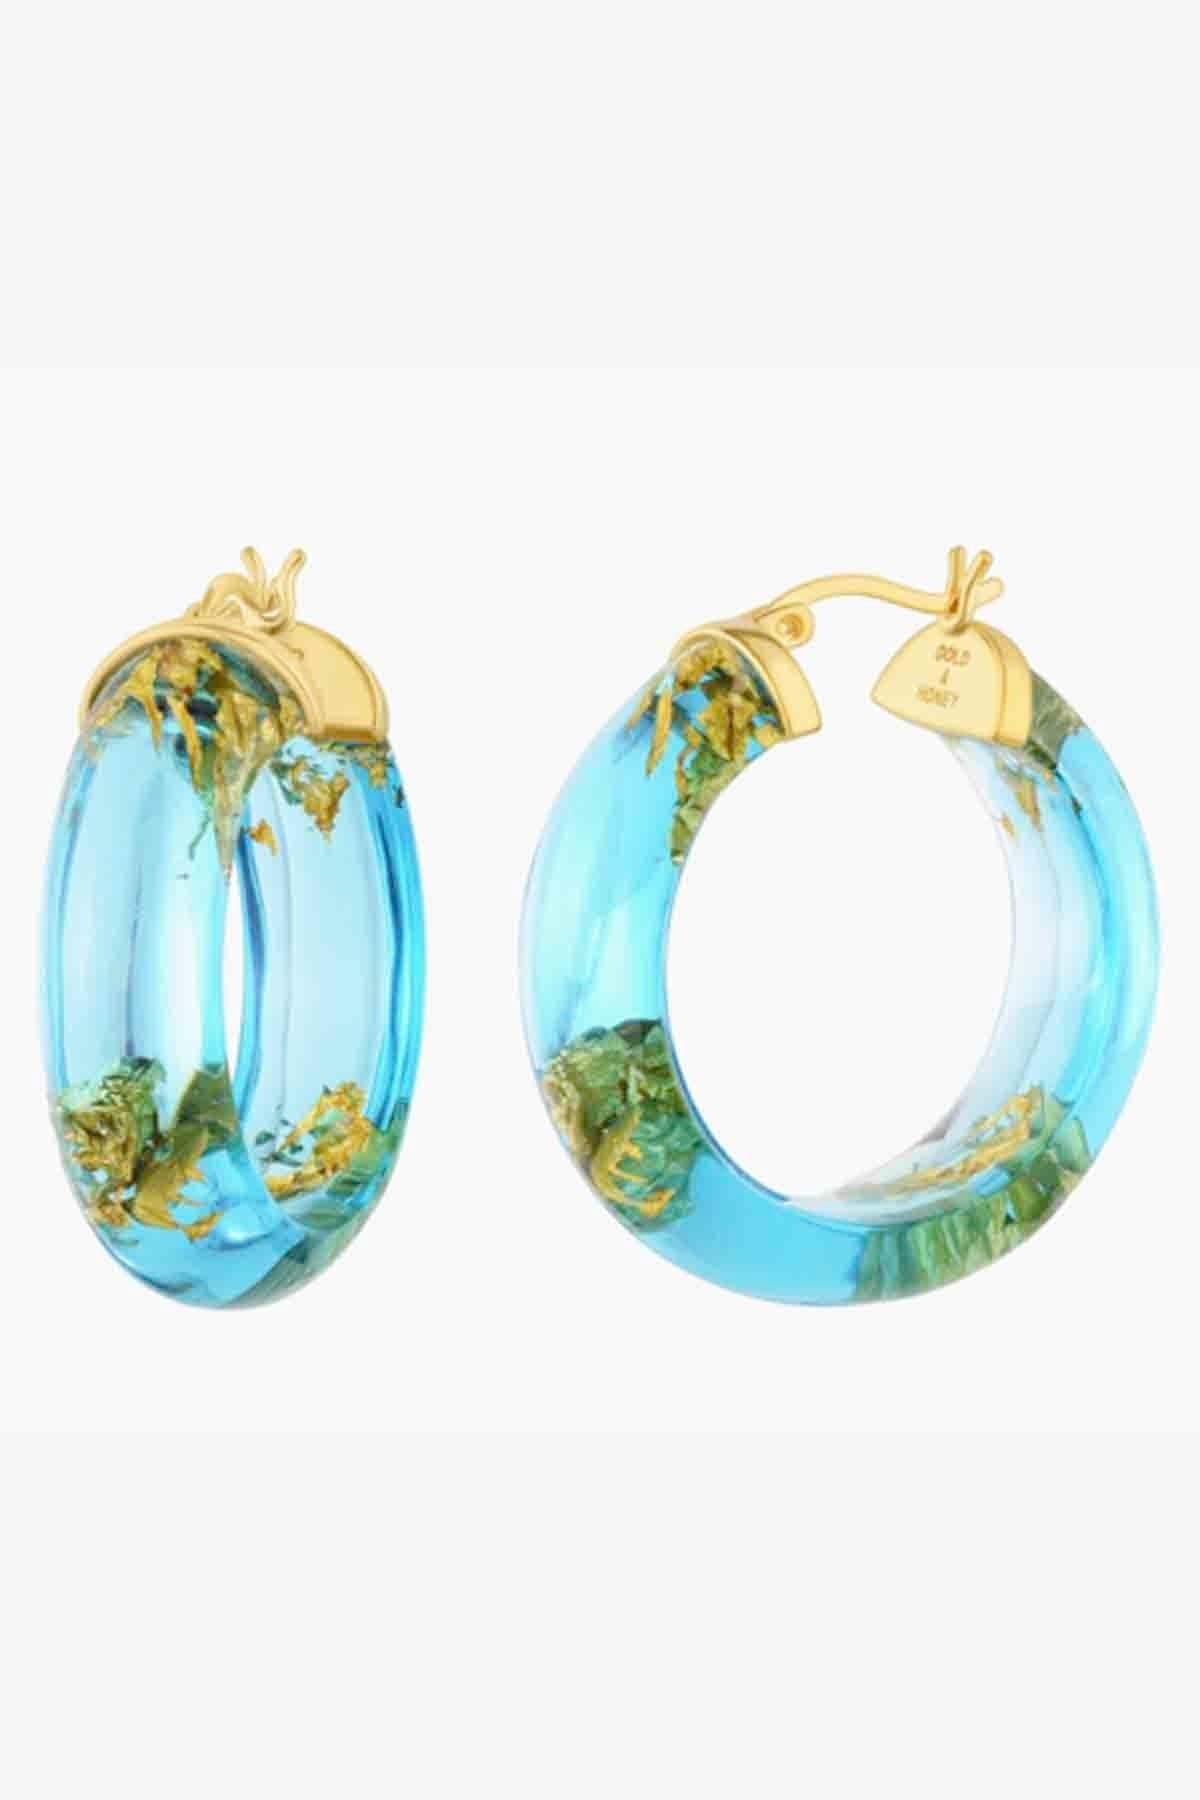 aqua 1.25" Hoops by Gold and Honey infused with 24K Gold Leaf